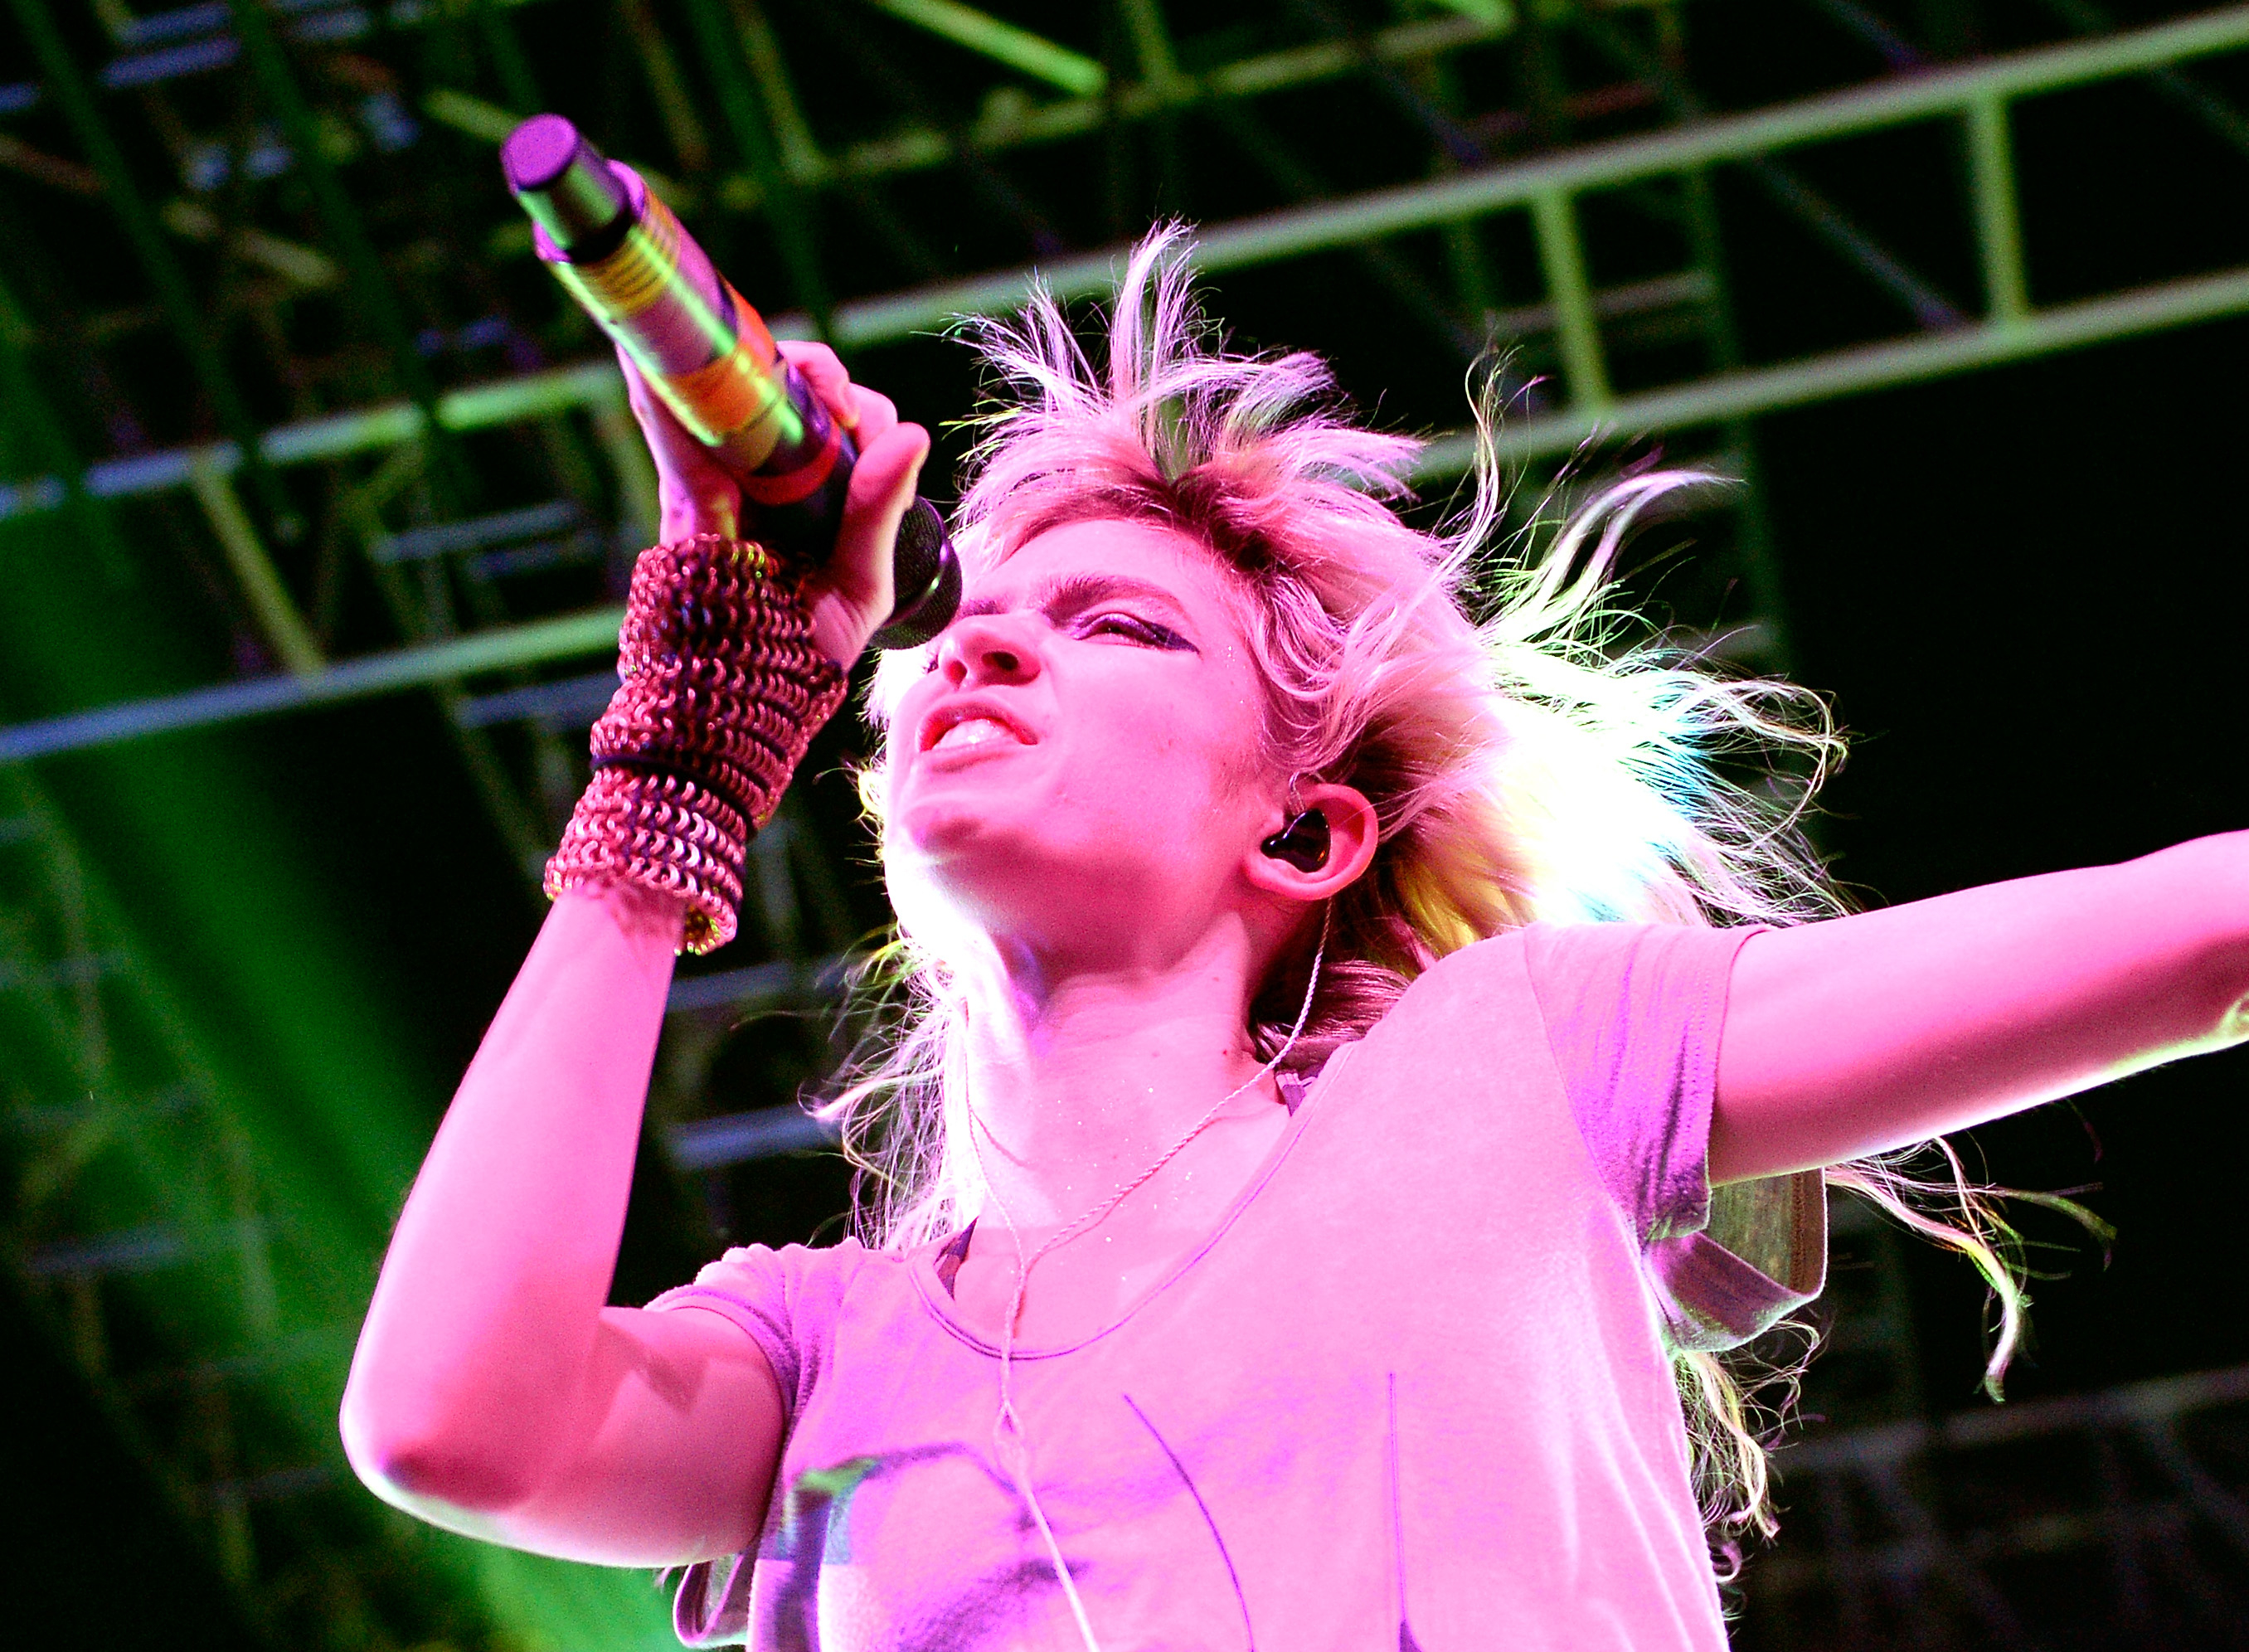 grimes singing on stage